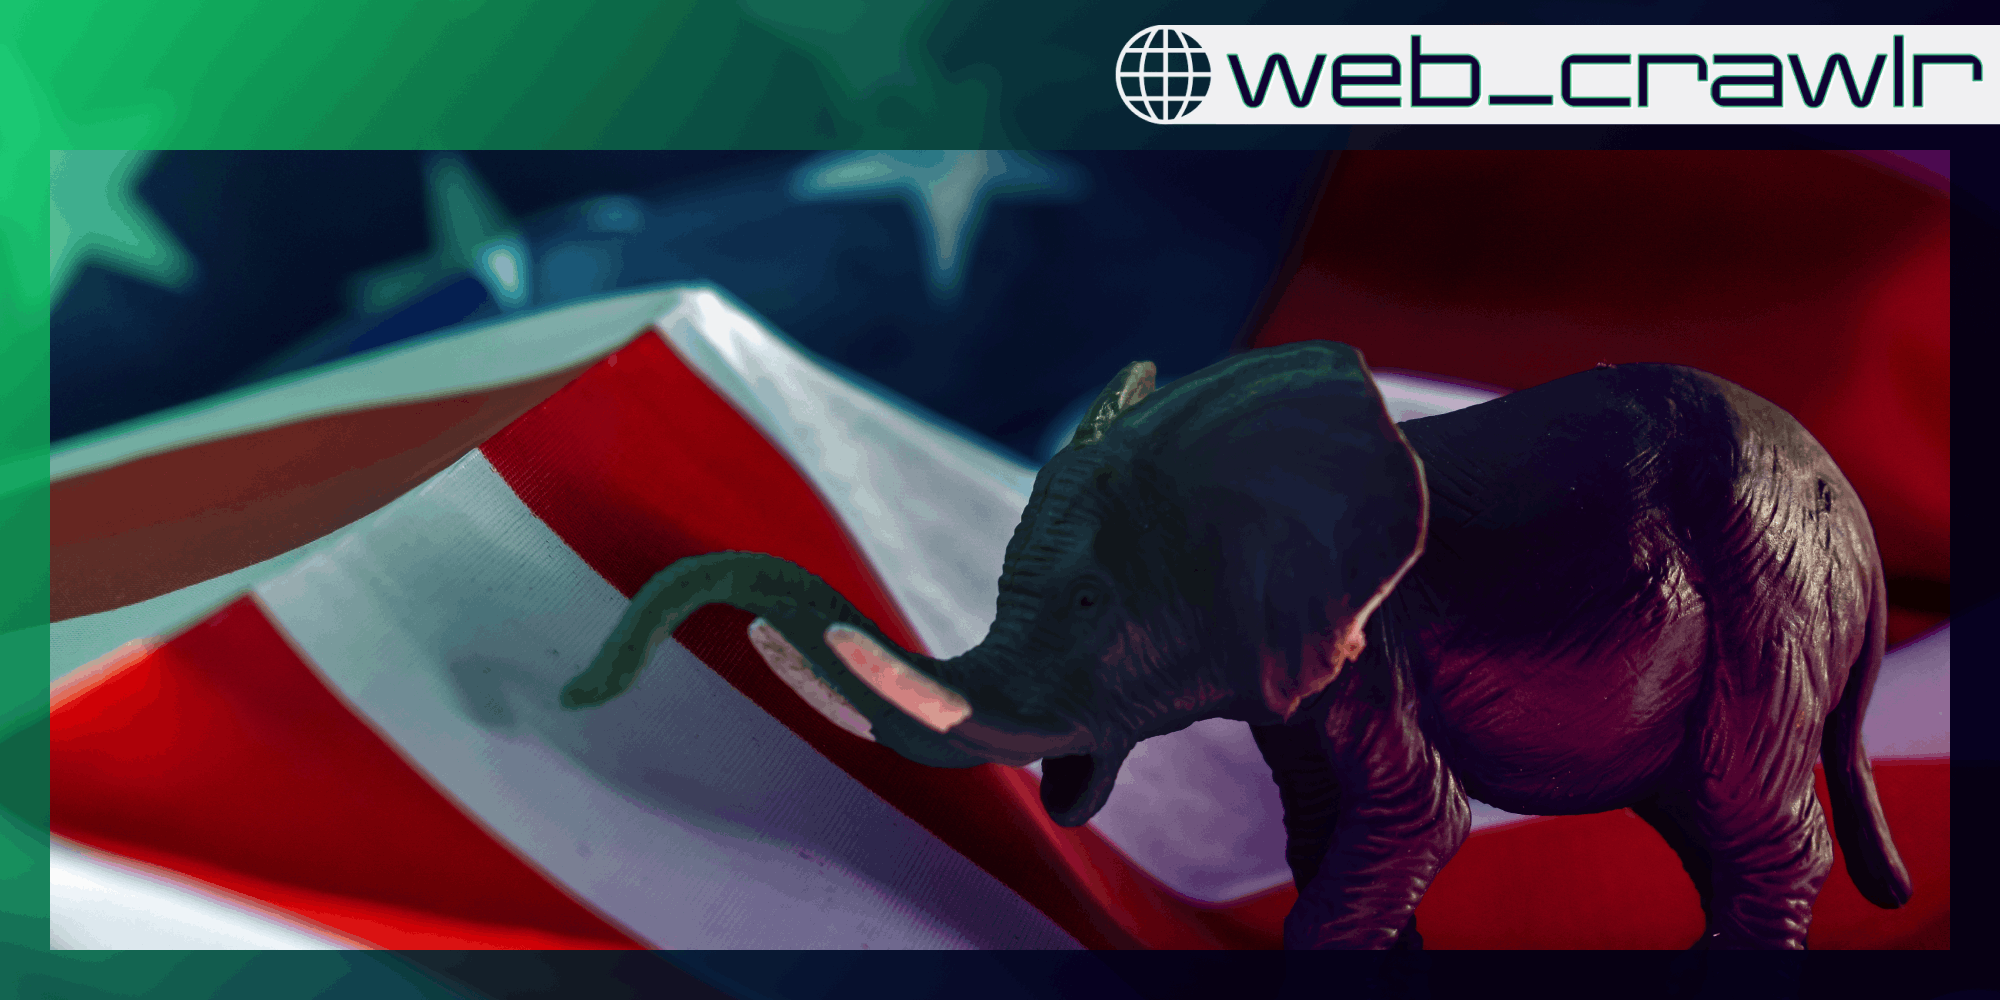 An elephant on an American flag. The Daily Dot newsletter web_crawlr logo is in the top right corner.